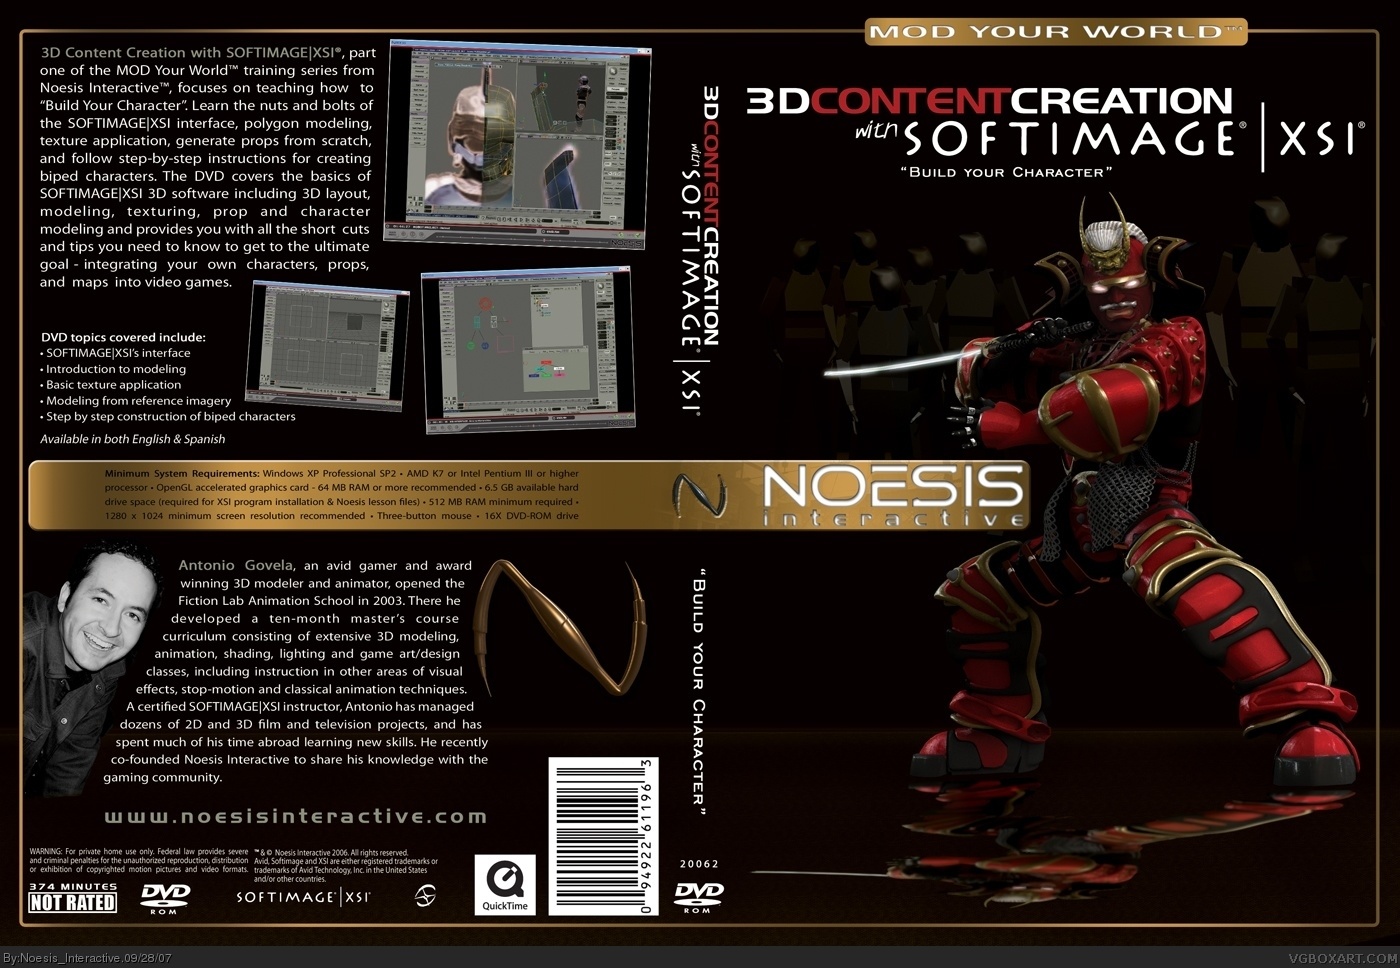 Noesis Interactive - 3D Content Creation with XSI box cover